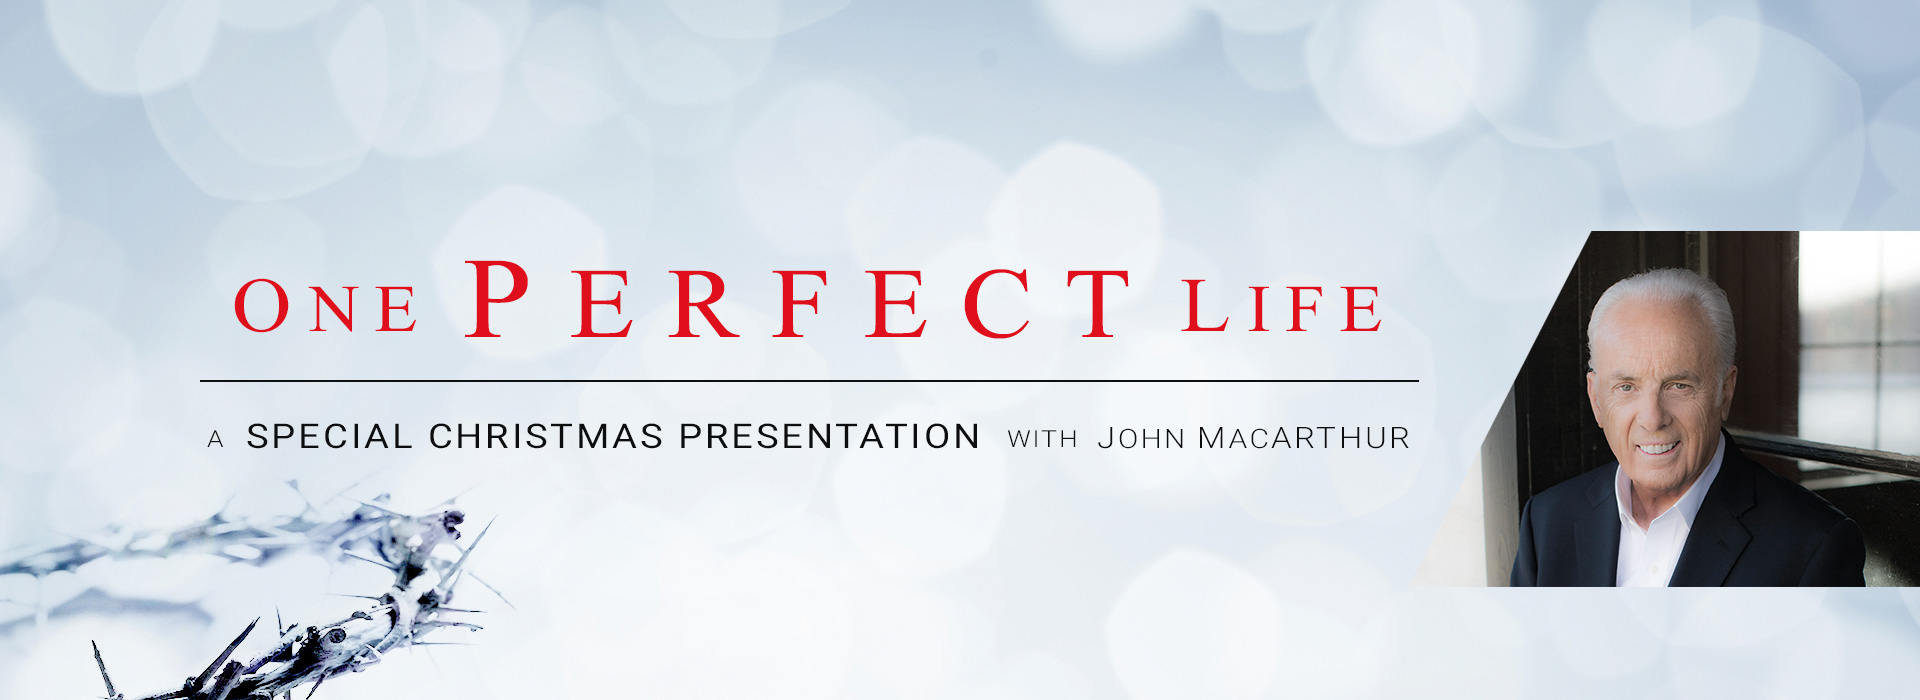 One Perfect Life - A Special Christmas Presentation with John MacArthur